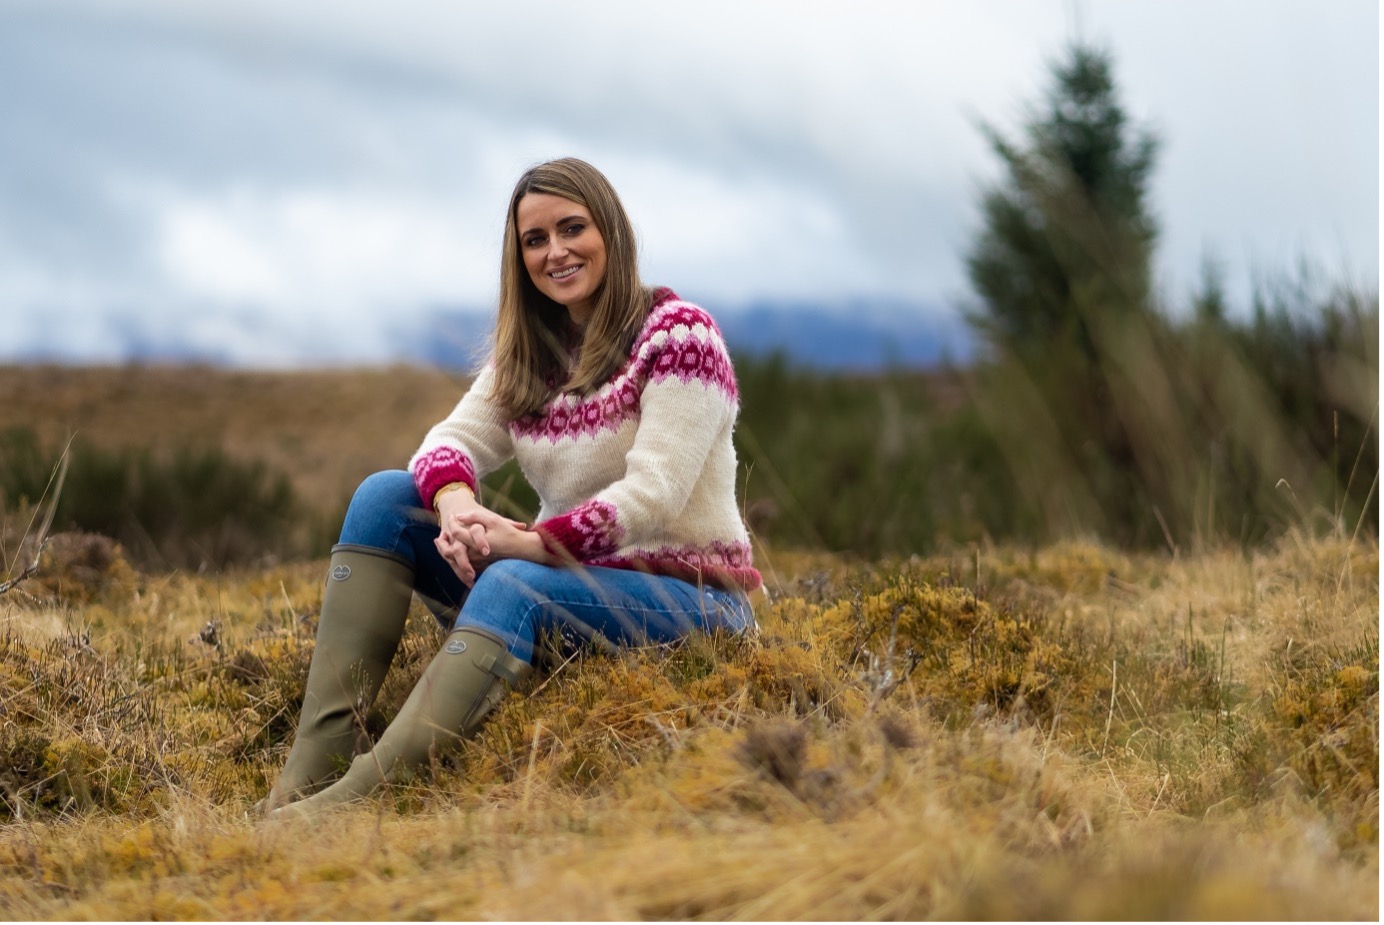 Promotional shot from Secrets in the Peat, courtesy of the BBC. Presenter Anne McAlpine wears wellington boots, jeans and a white wooden jumper, and sits on grass in an outdoor location.